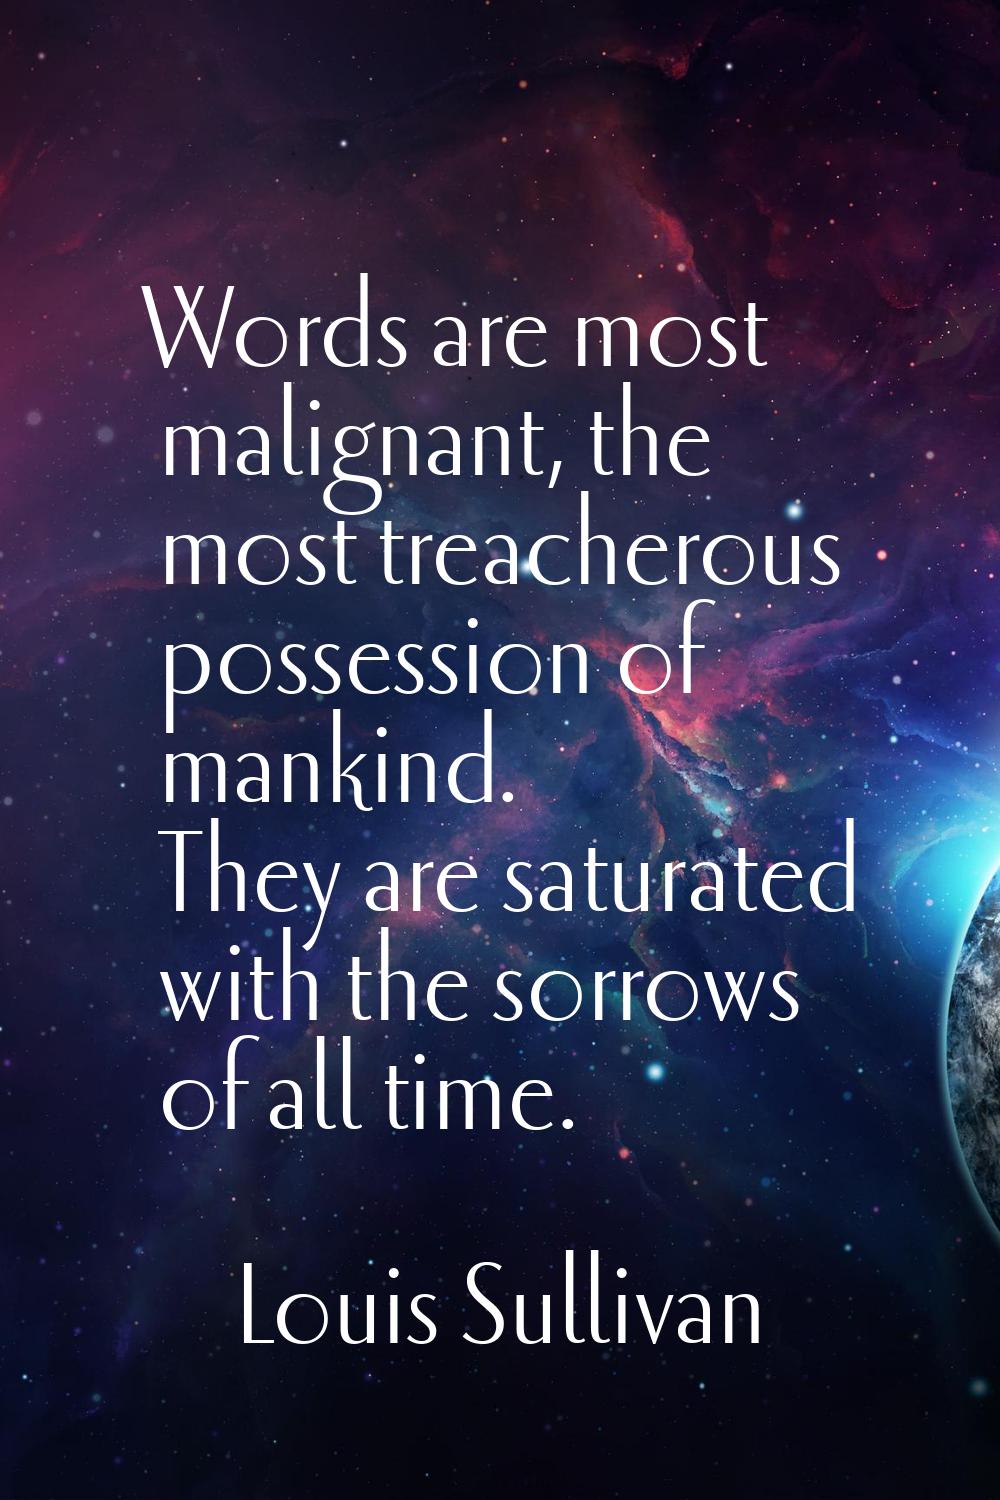 Words are most malignant, the most treacherous possession of mankind. They are saturated with the s